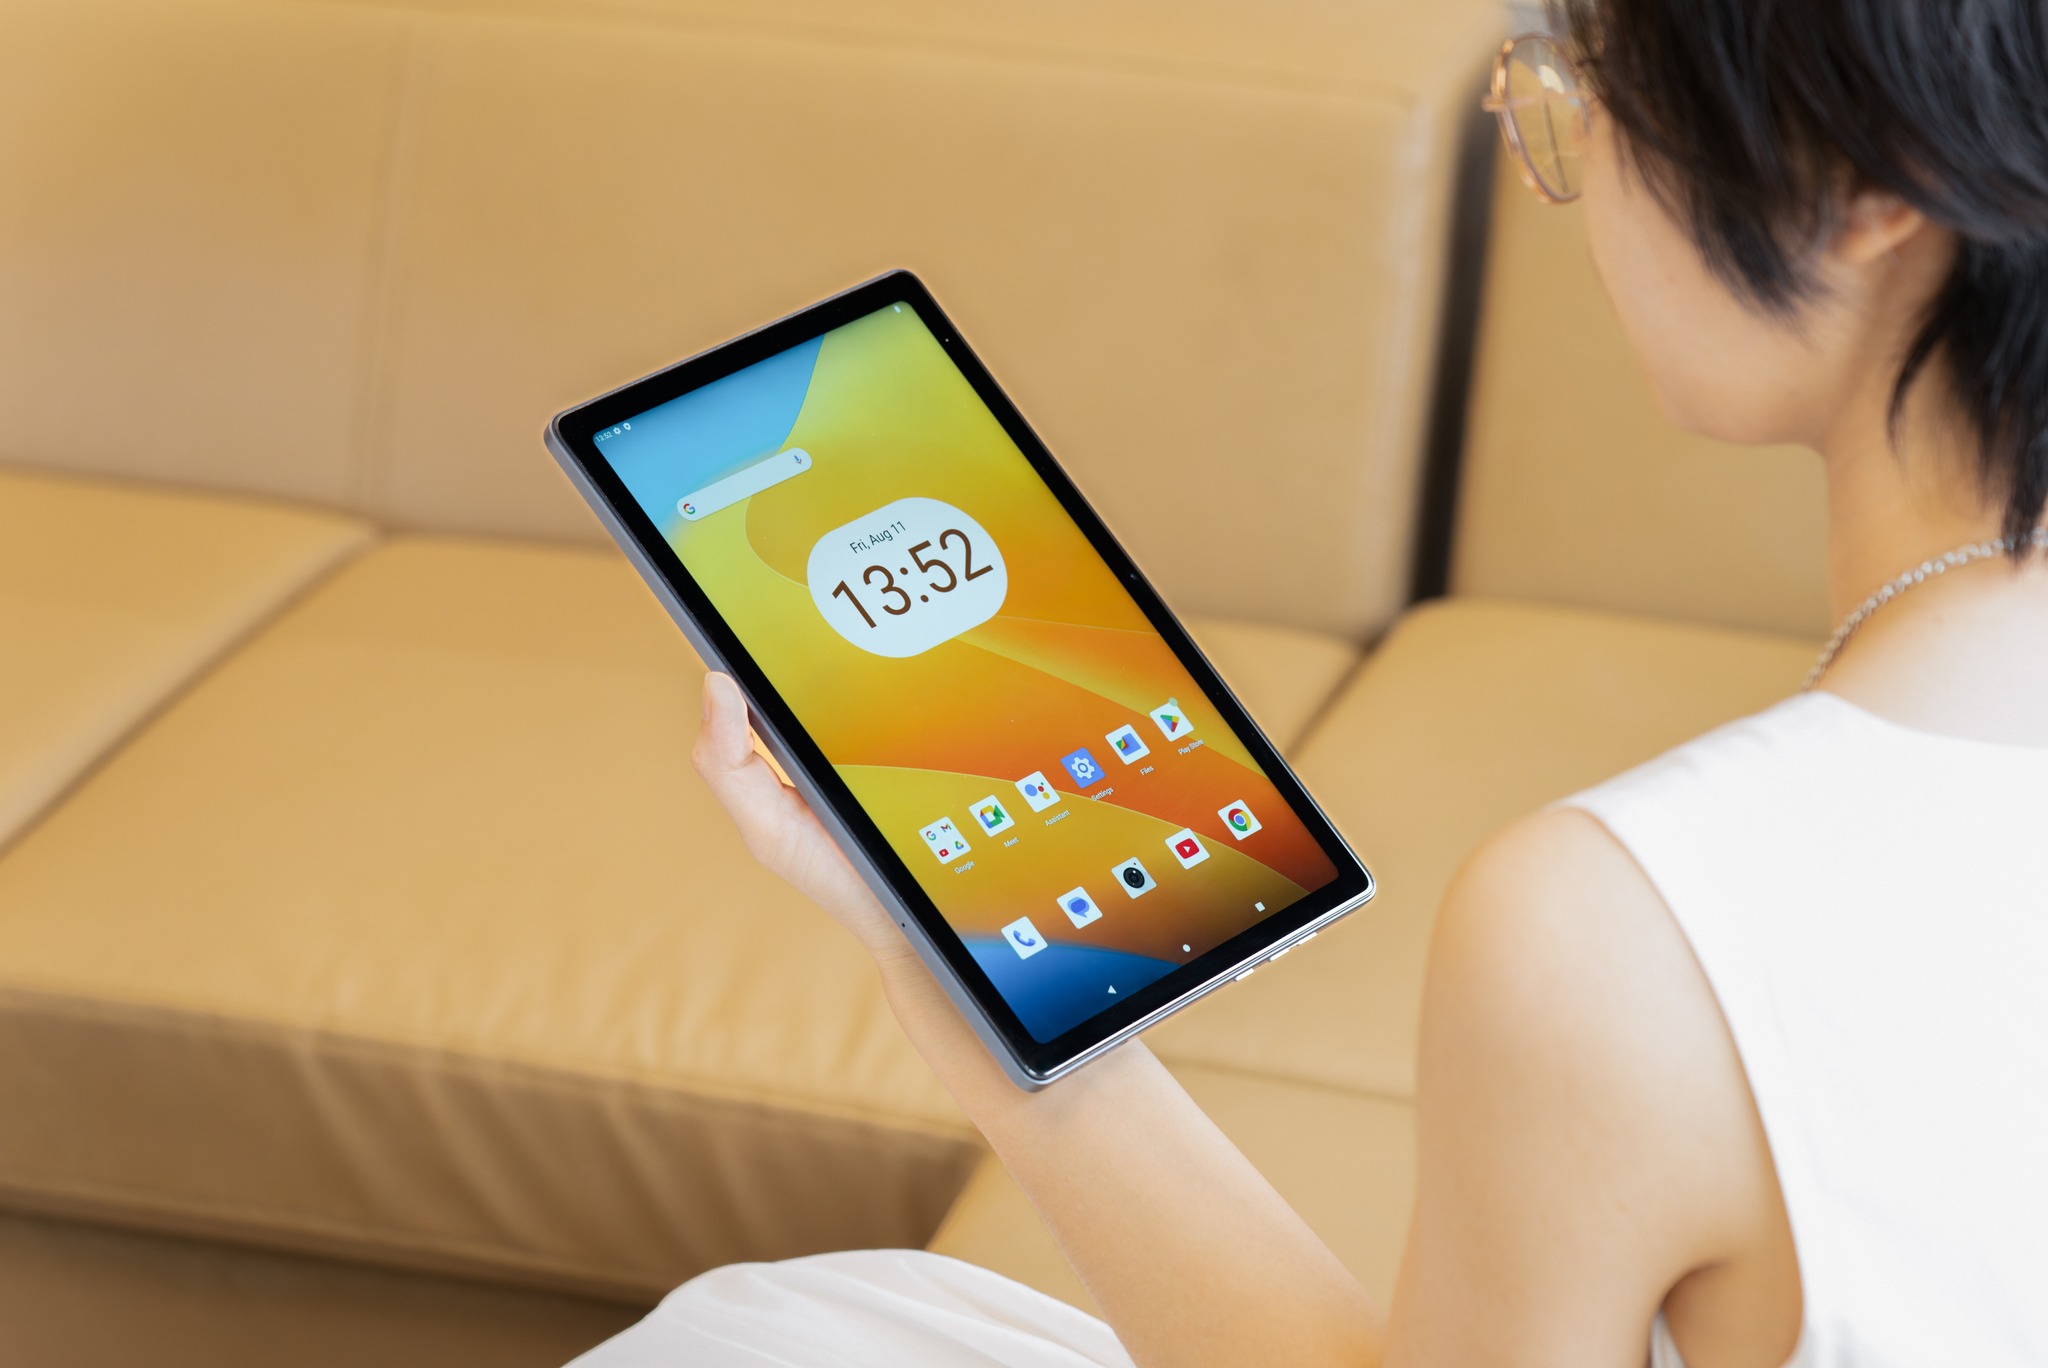 World Premiere of Cubot TAB 40 - Get your tablet now for $119.99